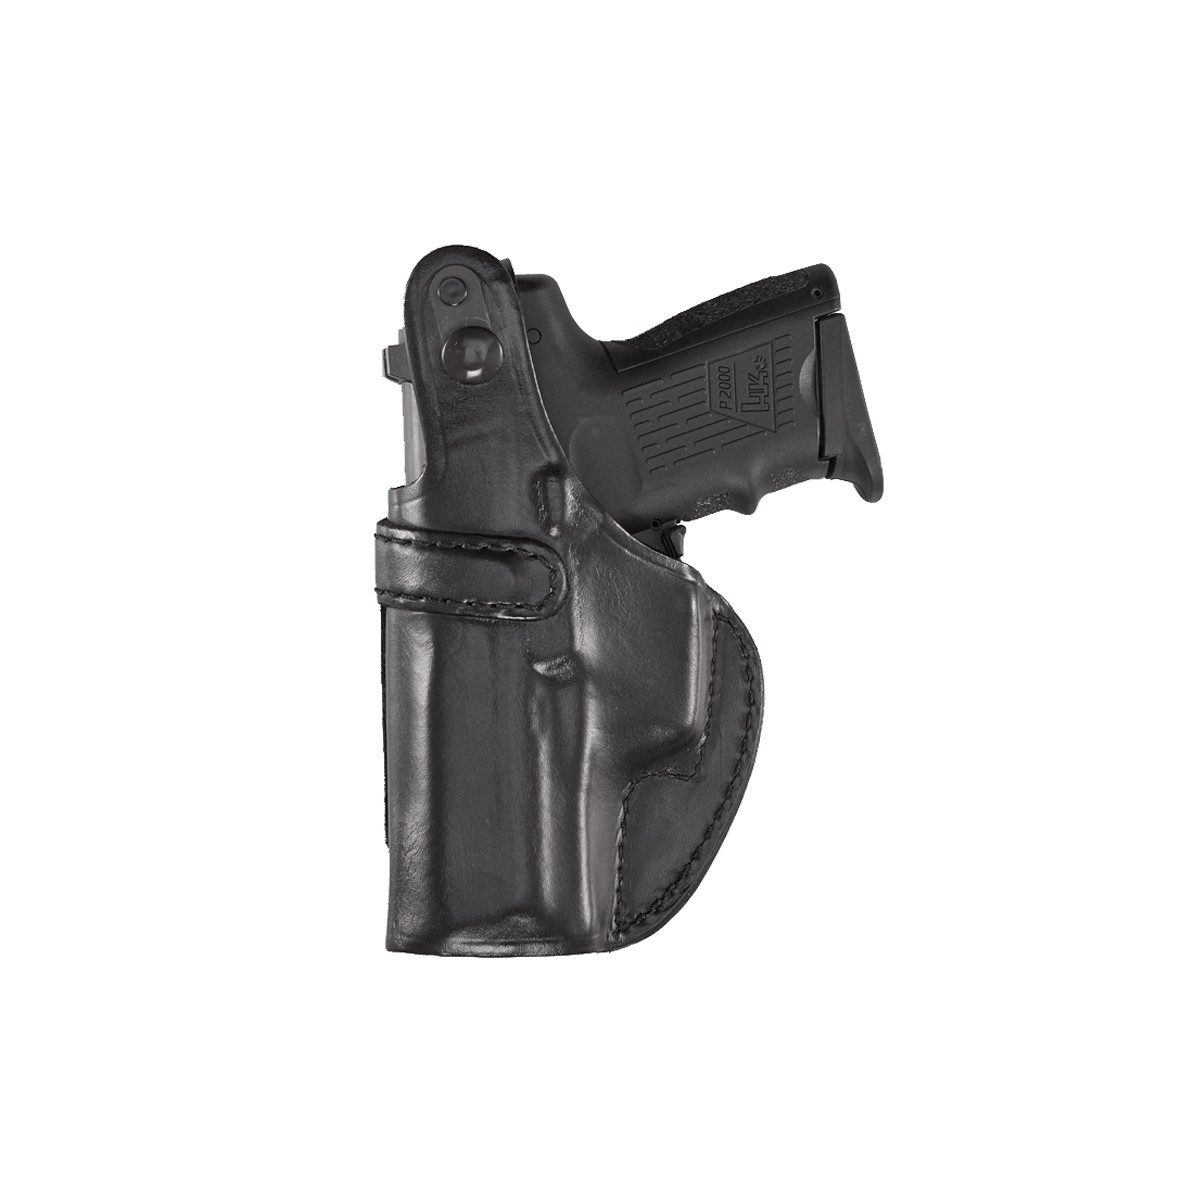 Aker Leather Spring Special™ Executive IWB Holster 160 - Tactical & Duty Gear